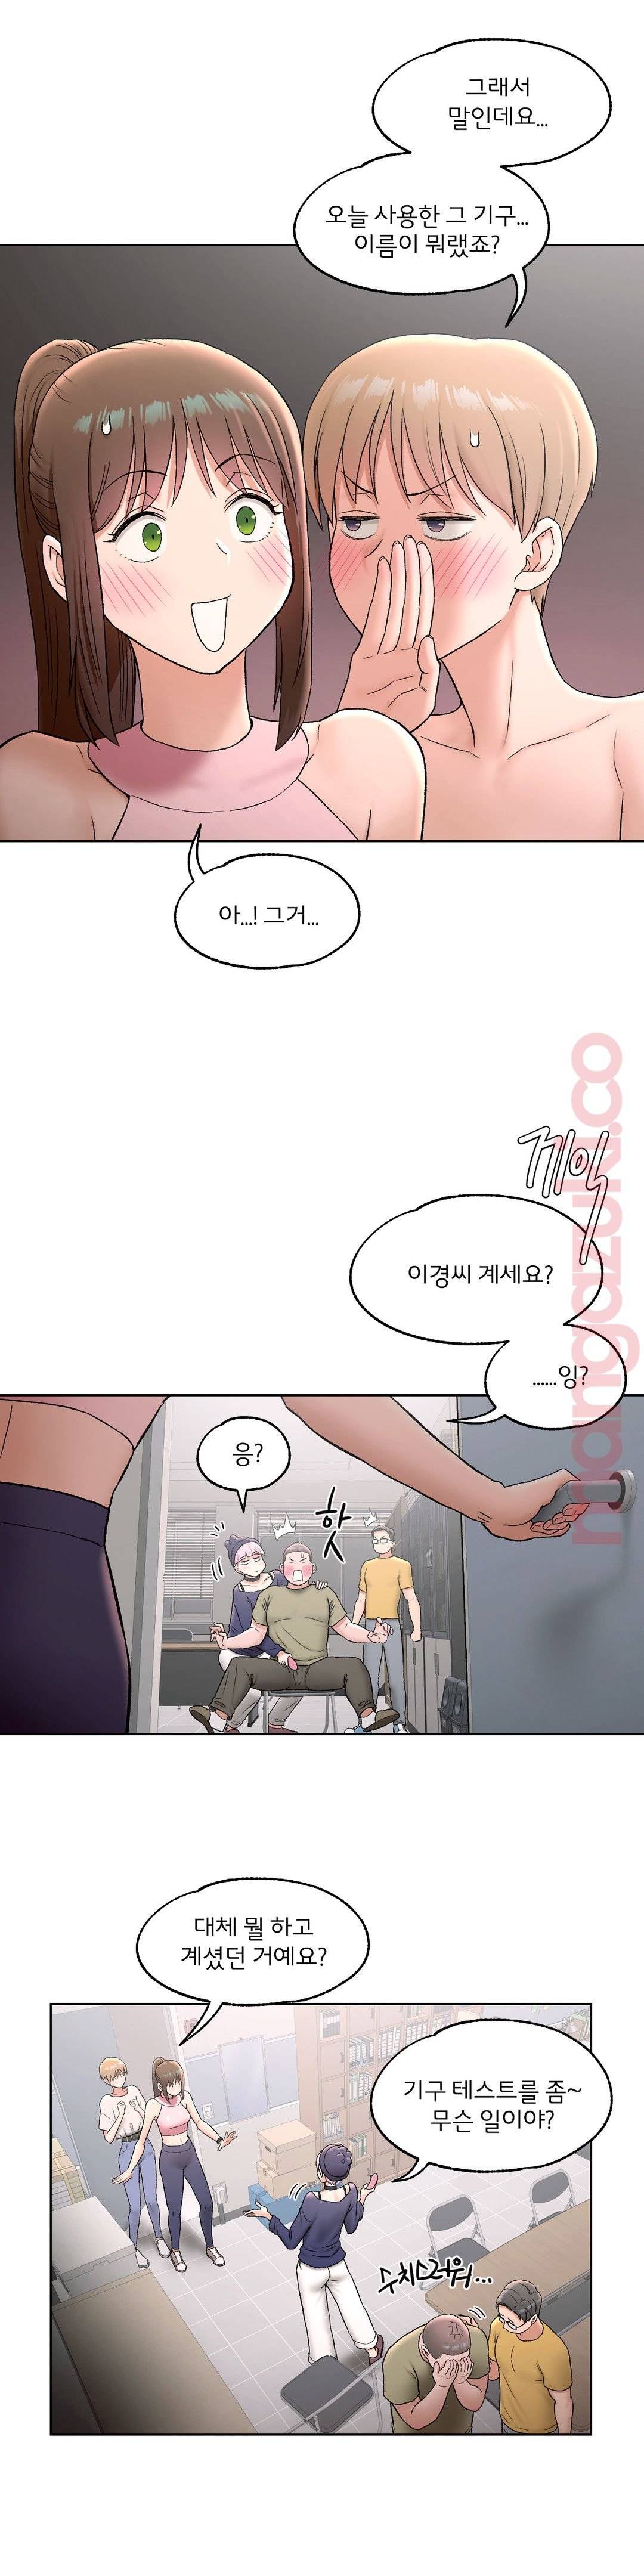 Sexercise Raw - Chapter 66 Page 20